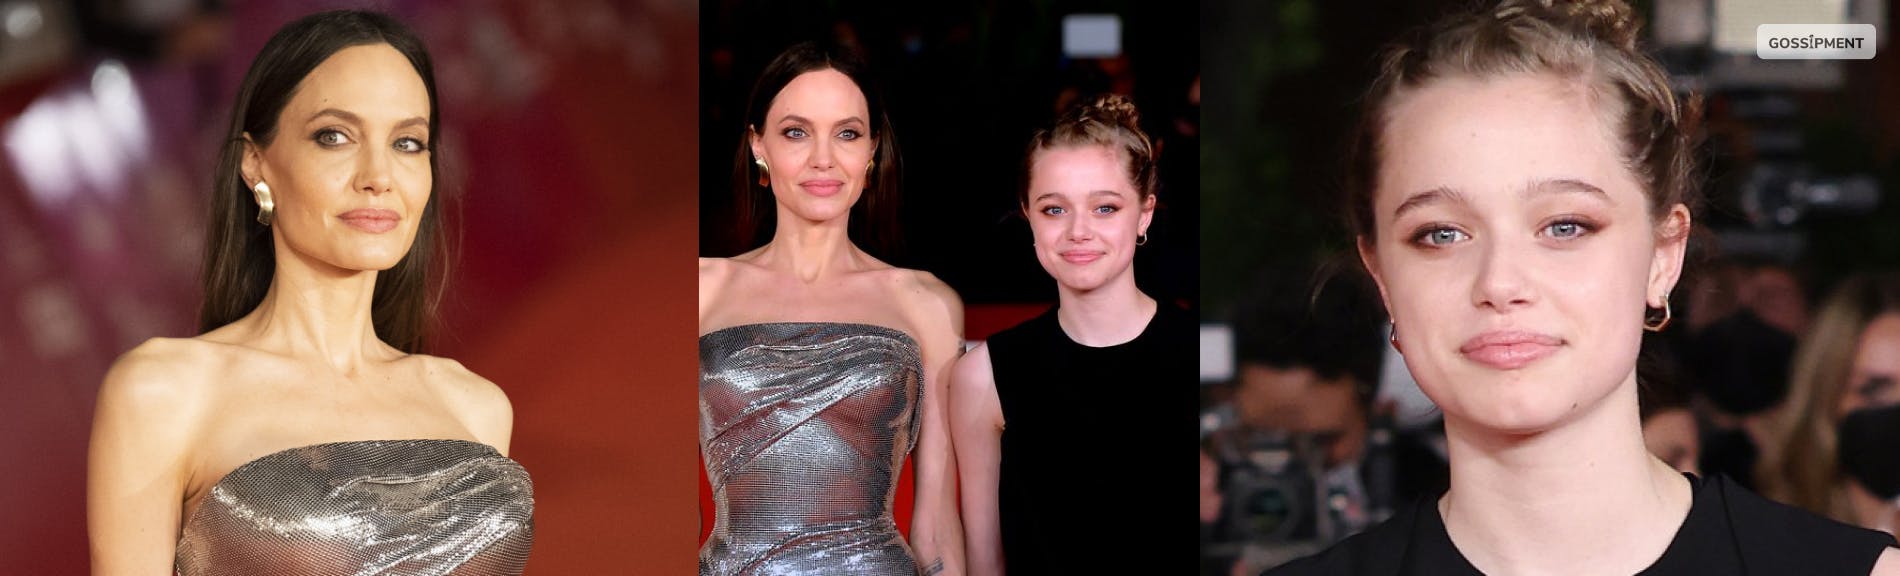 Cover Image for The Life and Times of Shiloh Jolie Pitt: A Look at Brad and Angelina’s Daughter